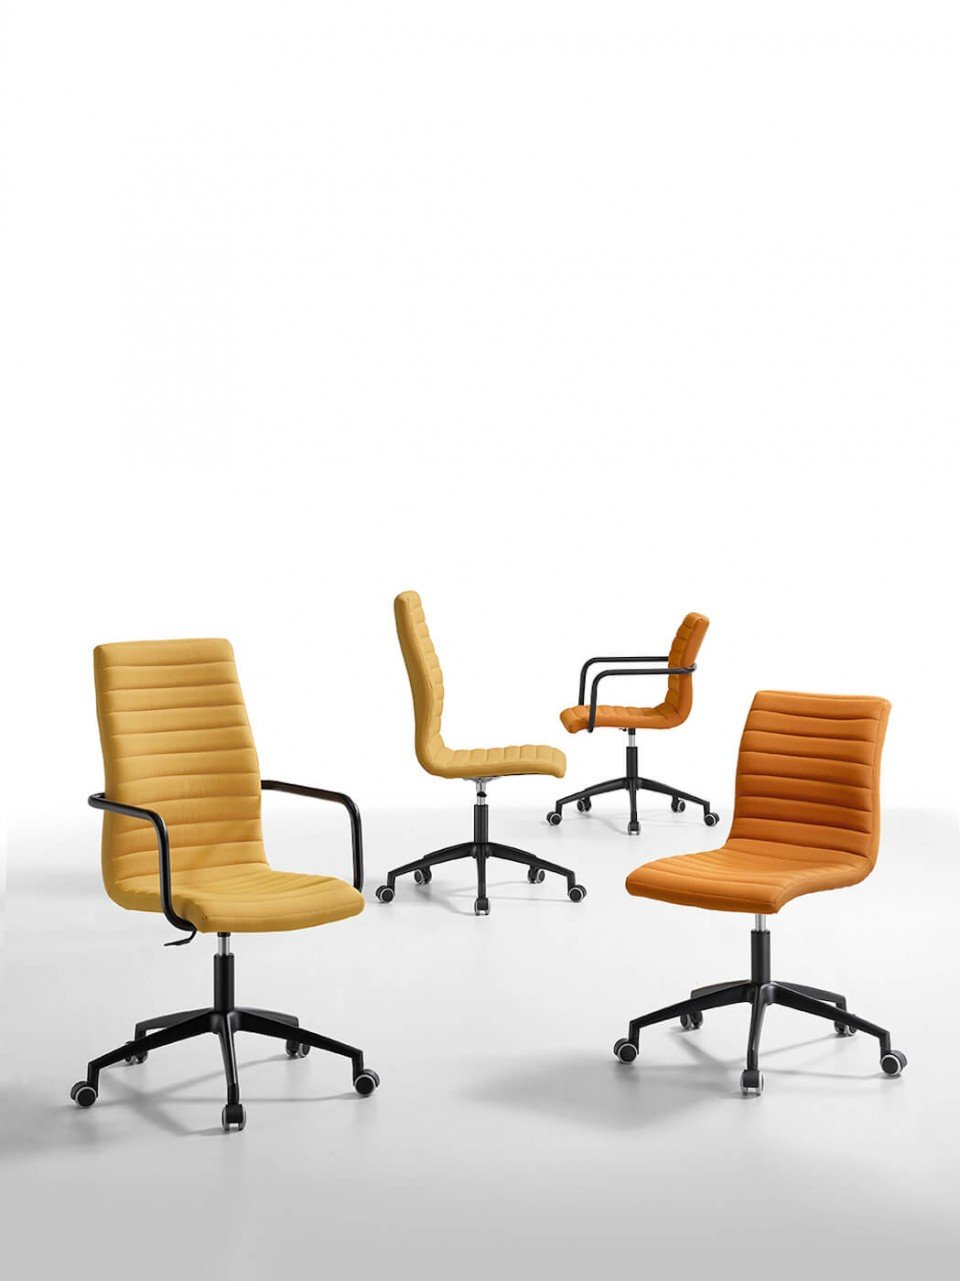 Star DSB TS Office Chair from Midj, designed by Midj R&D